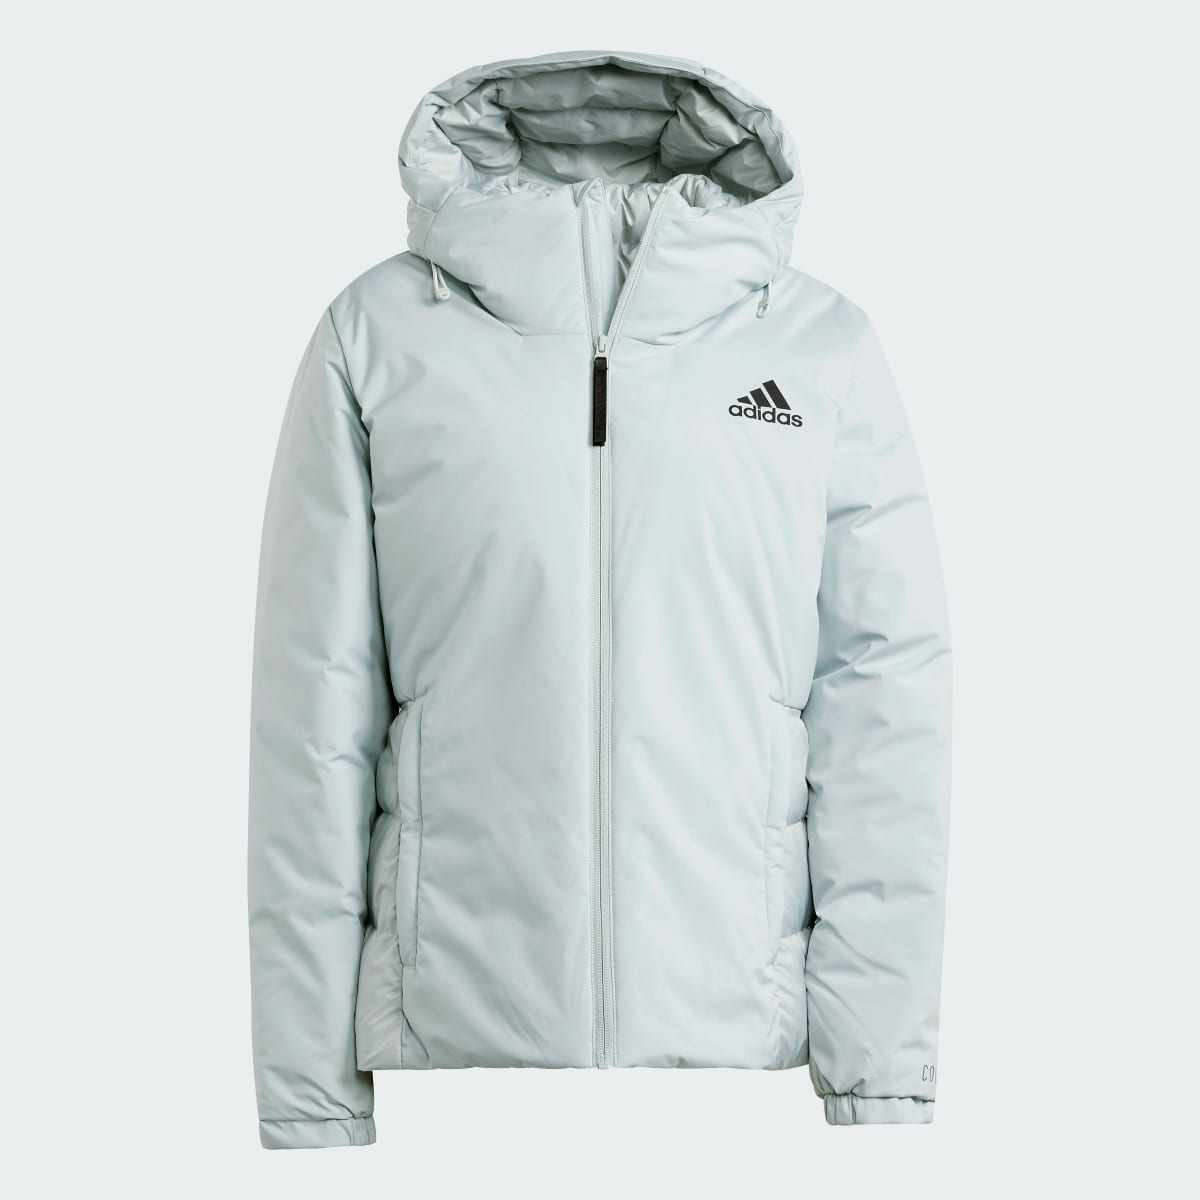 Adidas Traveer COLD.RDY Jacket. 7